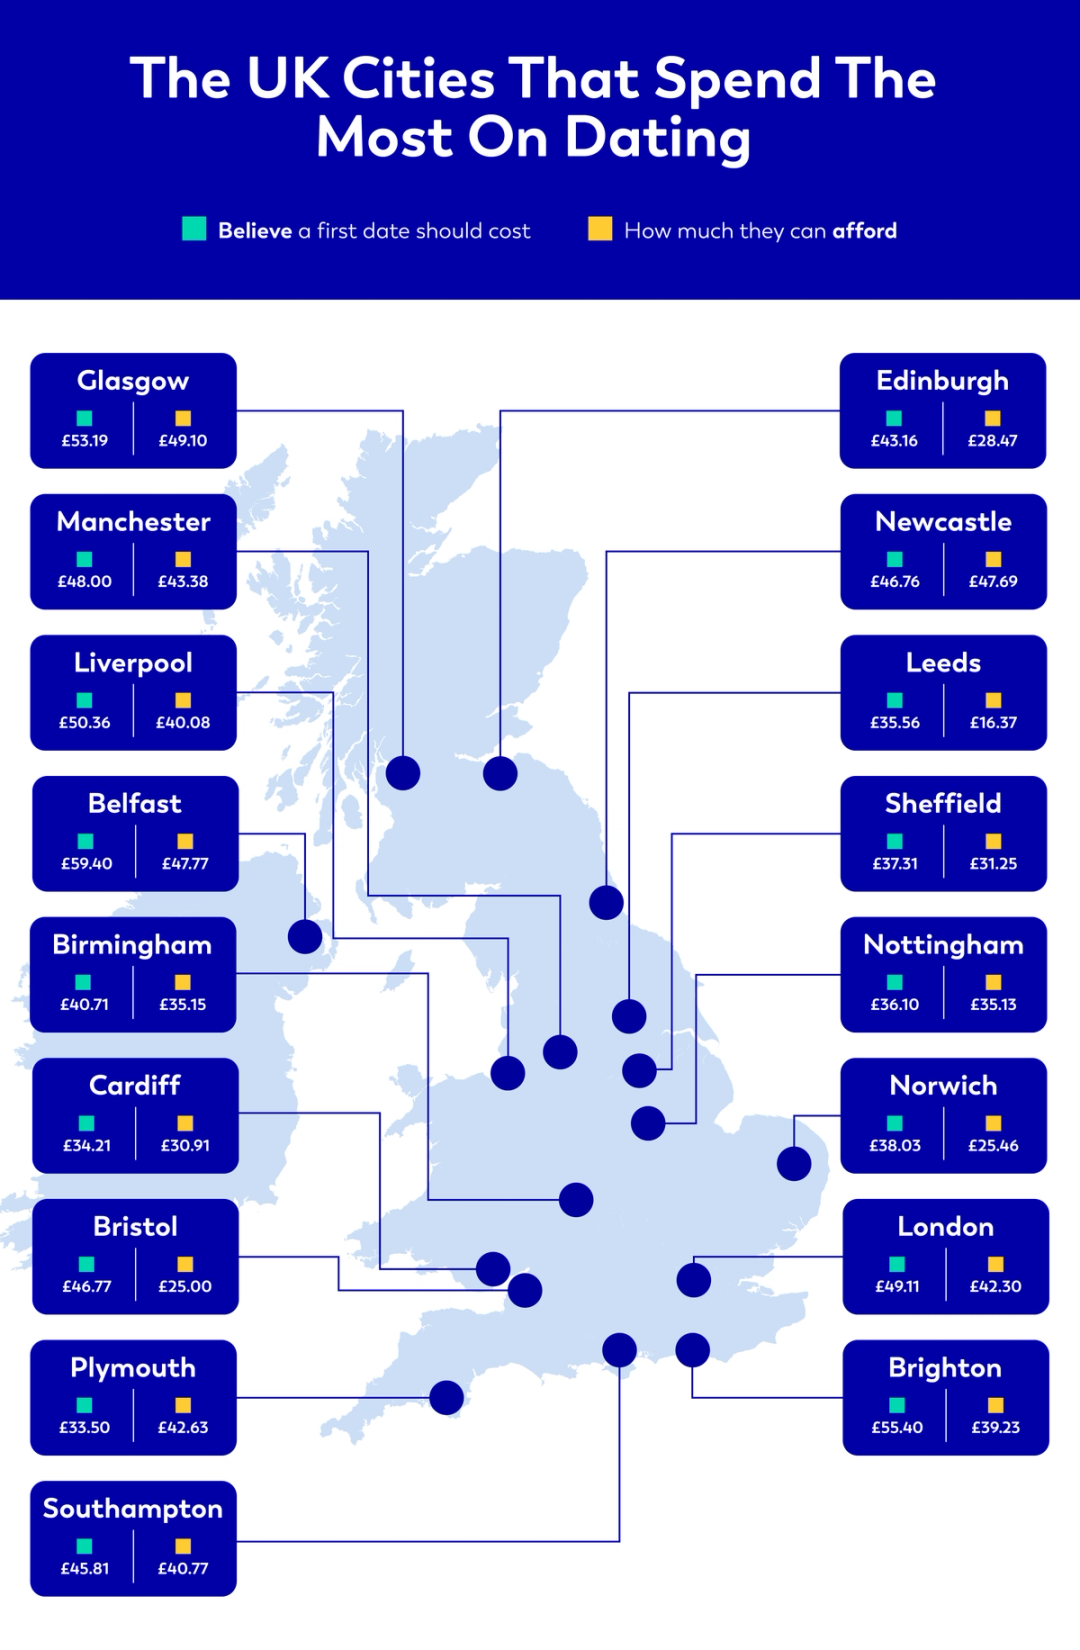 Infographic showing cities in the UK that spend the most on dating